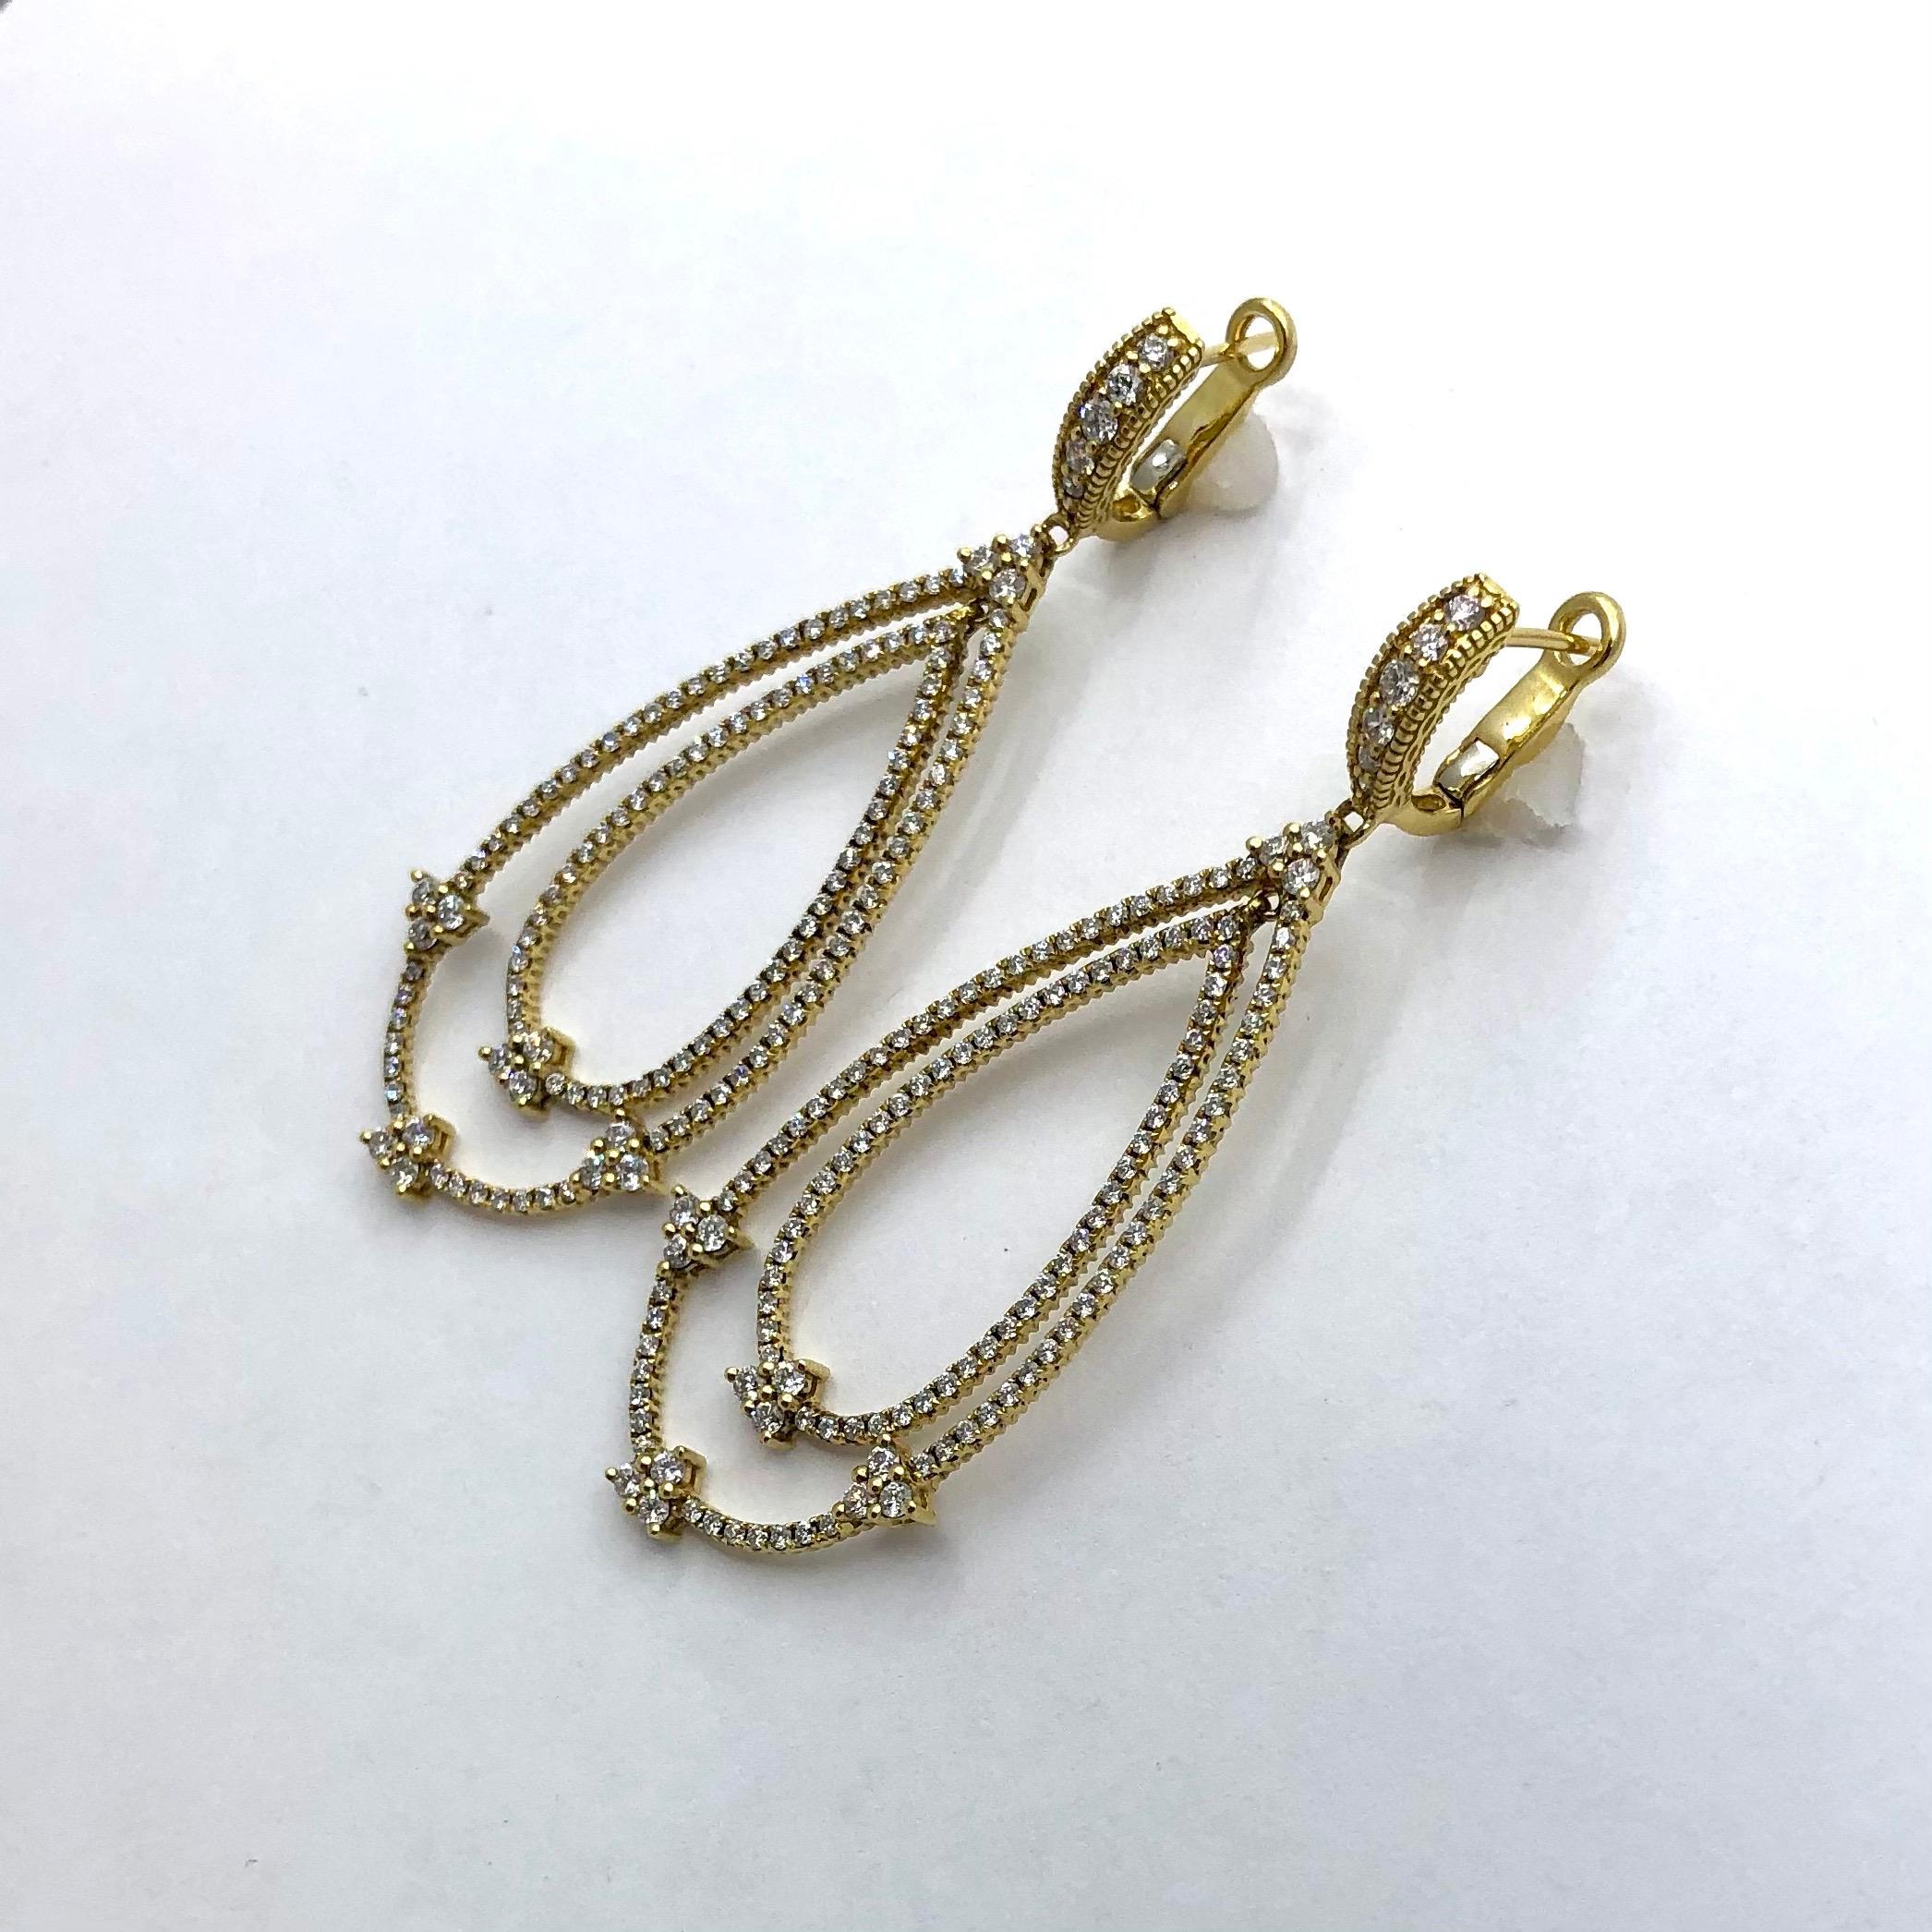 This scintillating pair of Judith Ripka, 18k yellow gold earrings is set with approximately 270 round brilliant cut diamonds having a total approximate weight of 2.65ct, of overall G color and VS1 clarity. This beautifully and delicately crafted